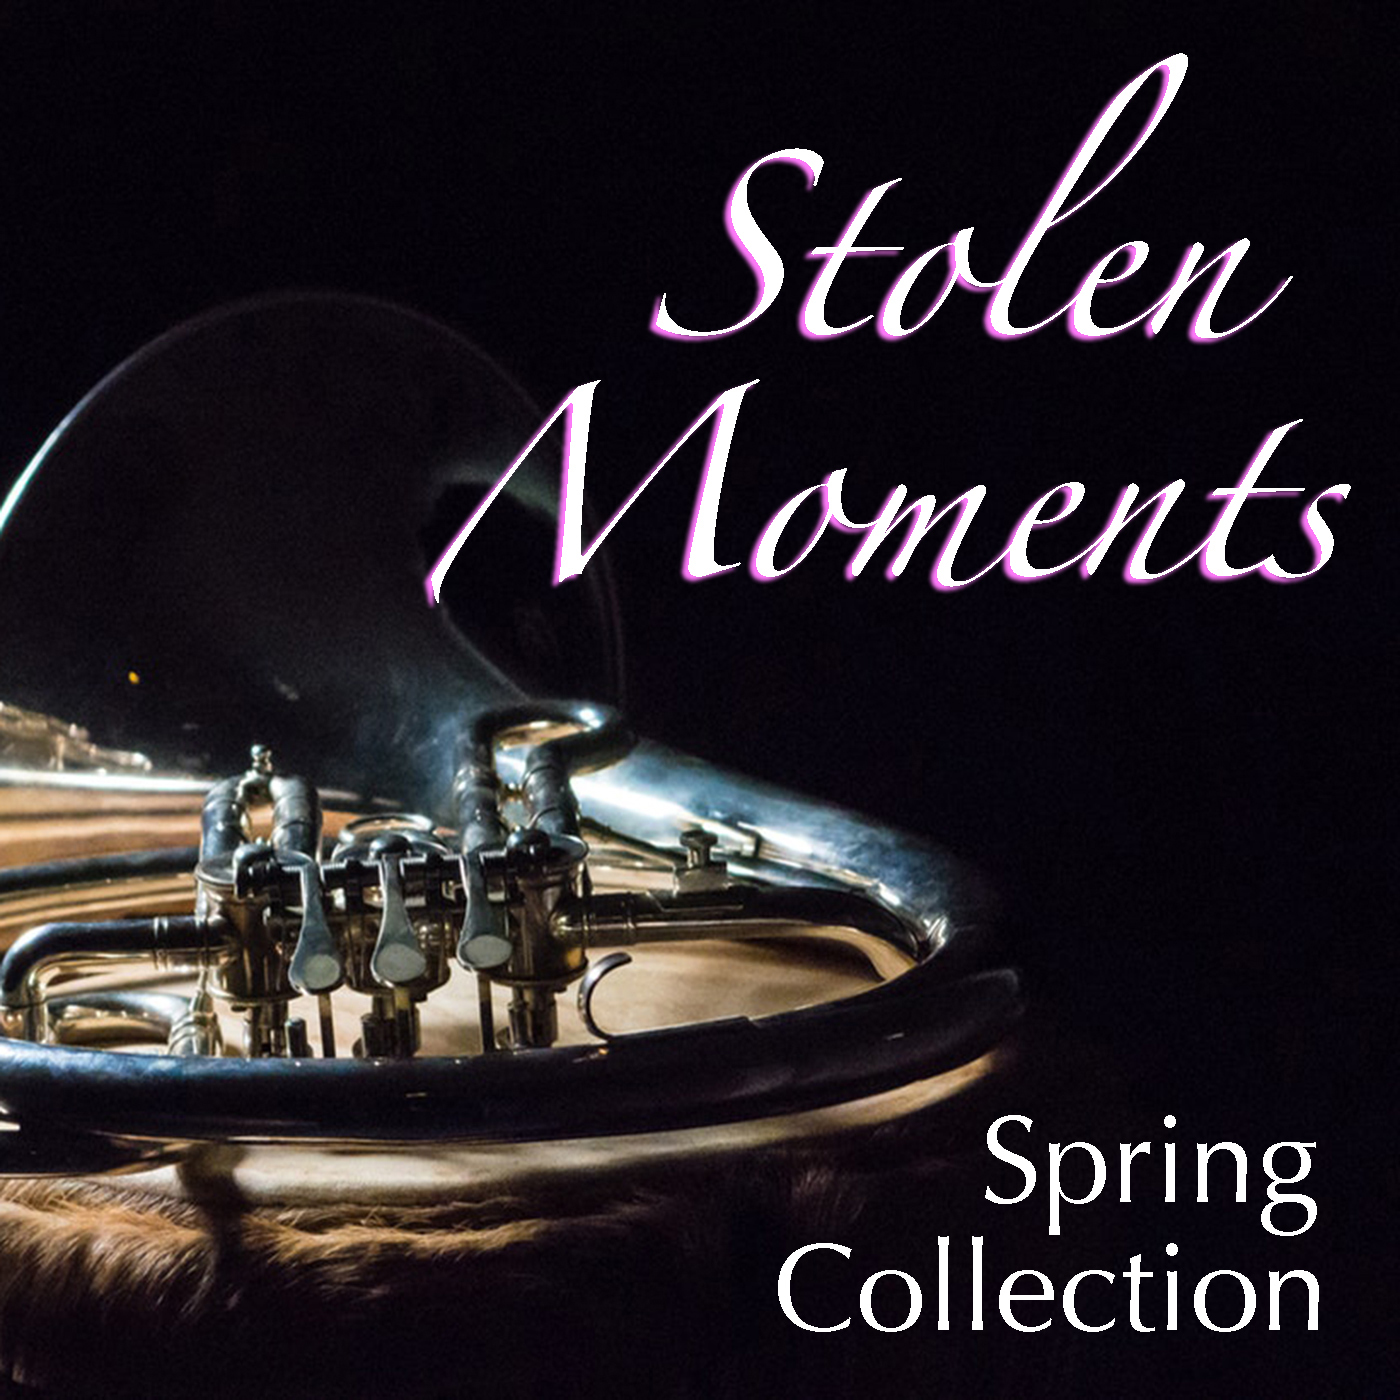 Stolen Moments Spring Collection